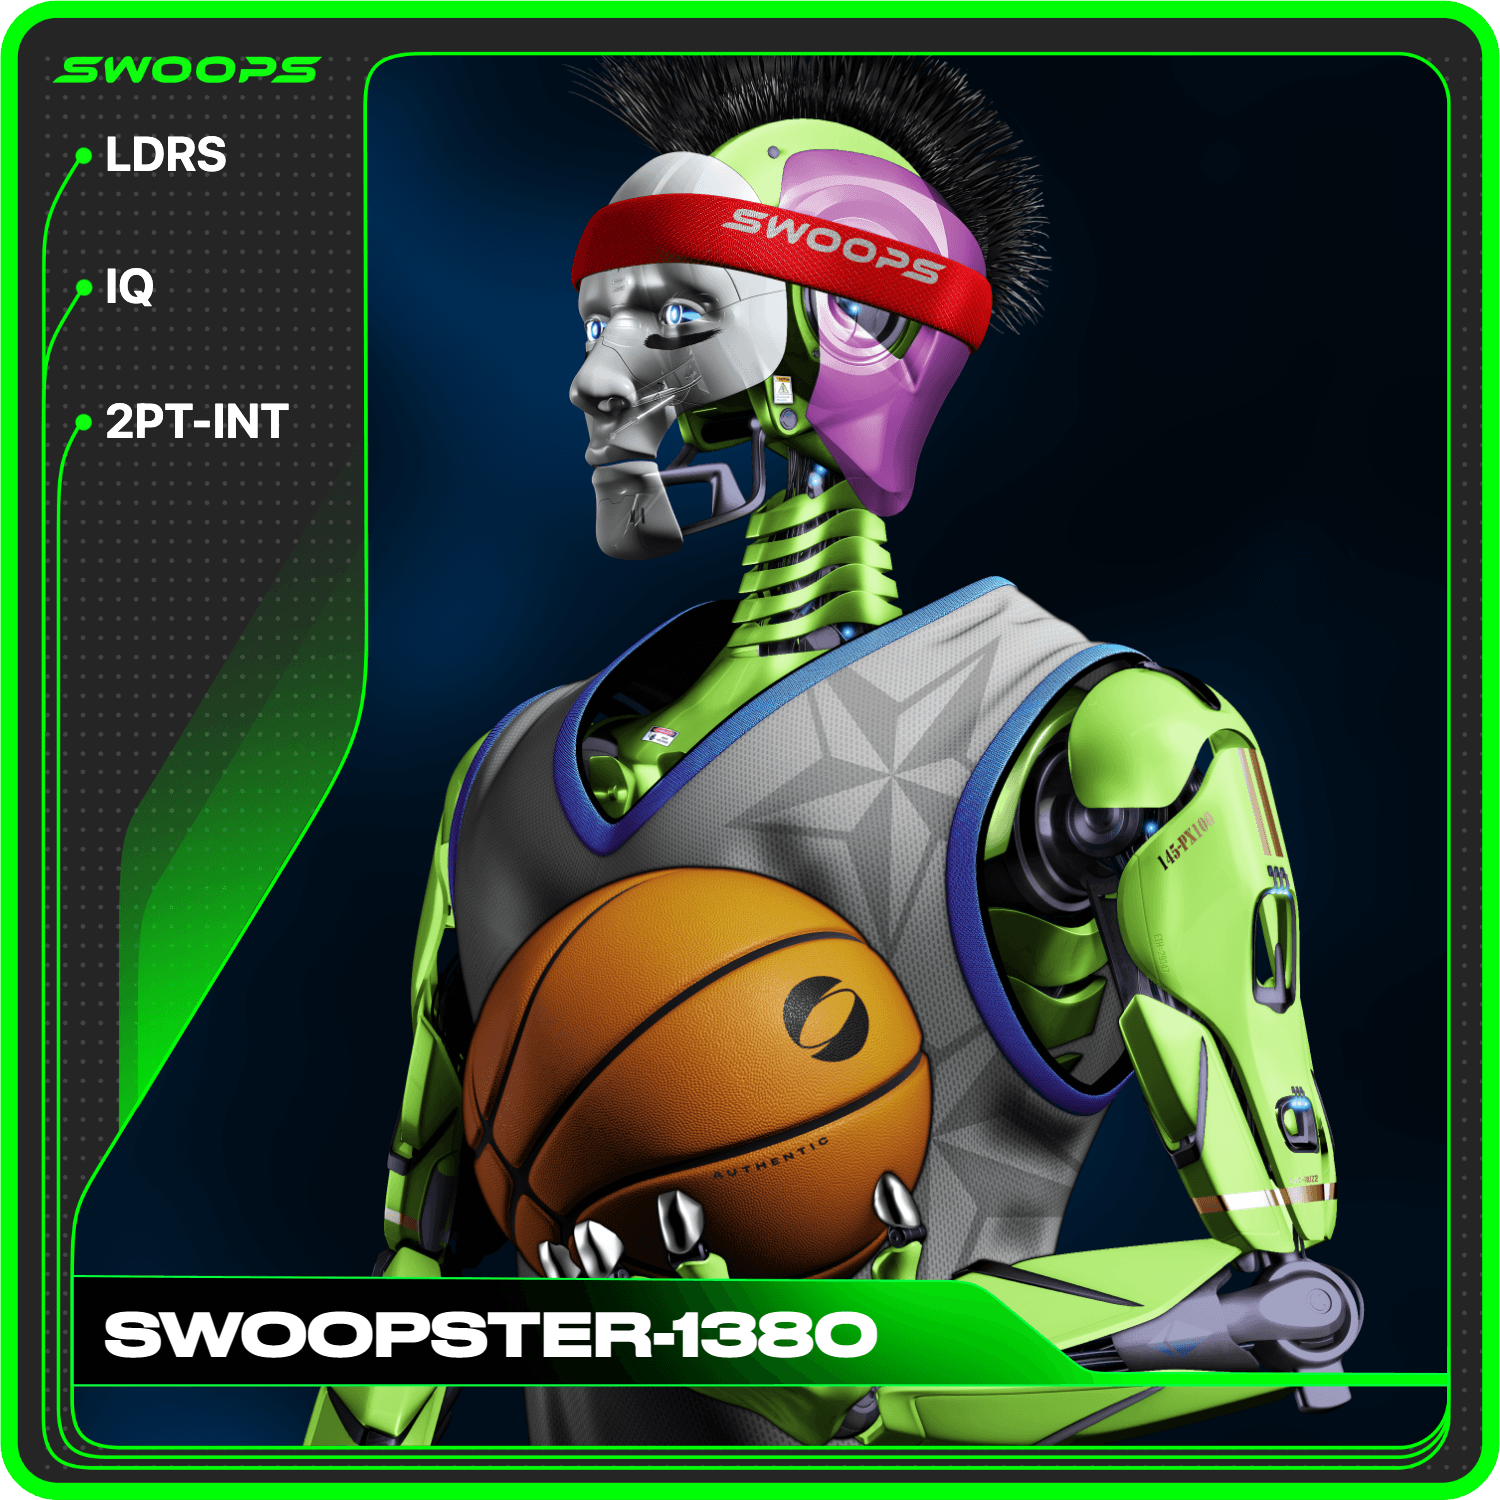 SWOOPSTER-1380